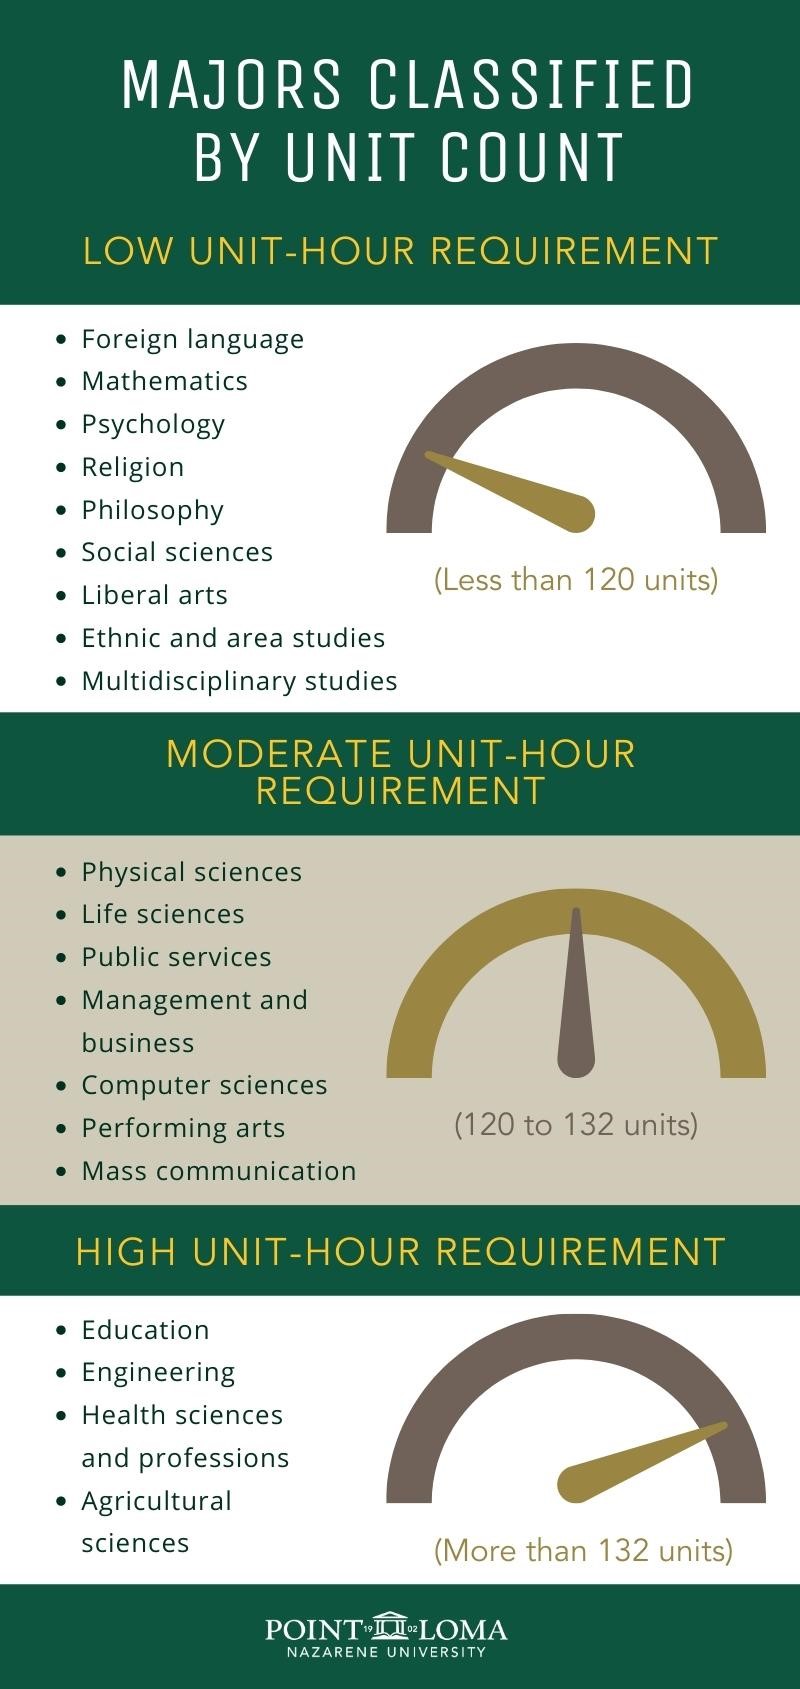 In 2011, all majors in the US were classified according to the number of units required to complete them. They were classified as either a low, moderate, or high unit-hour requirement.